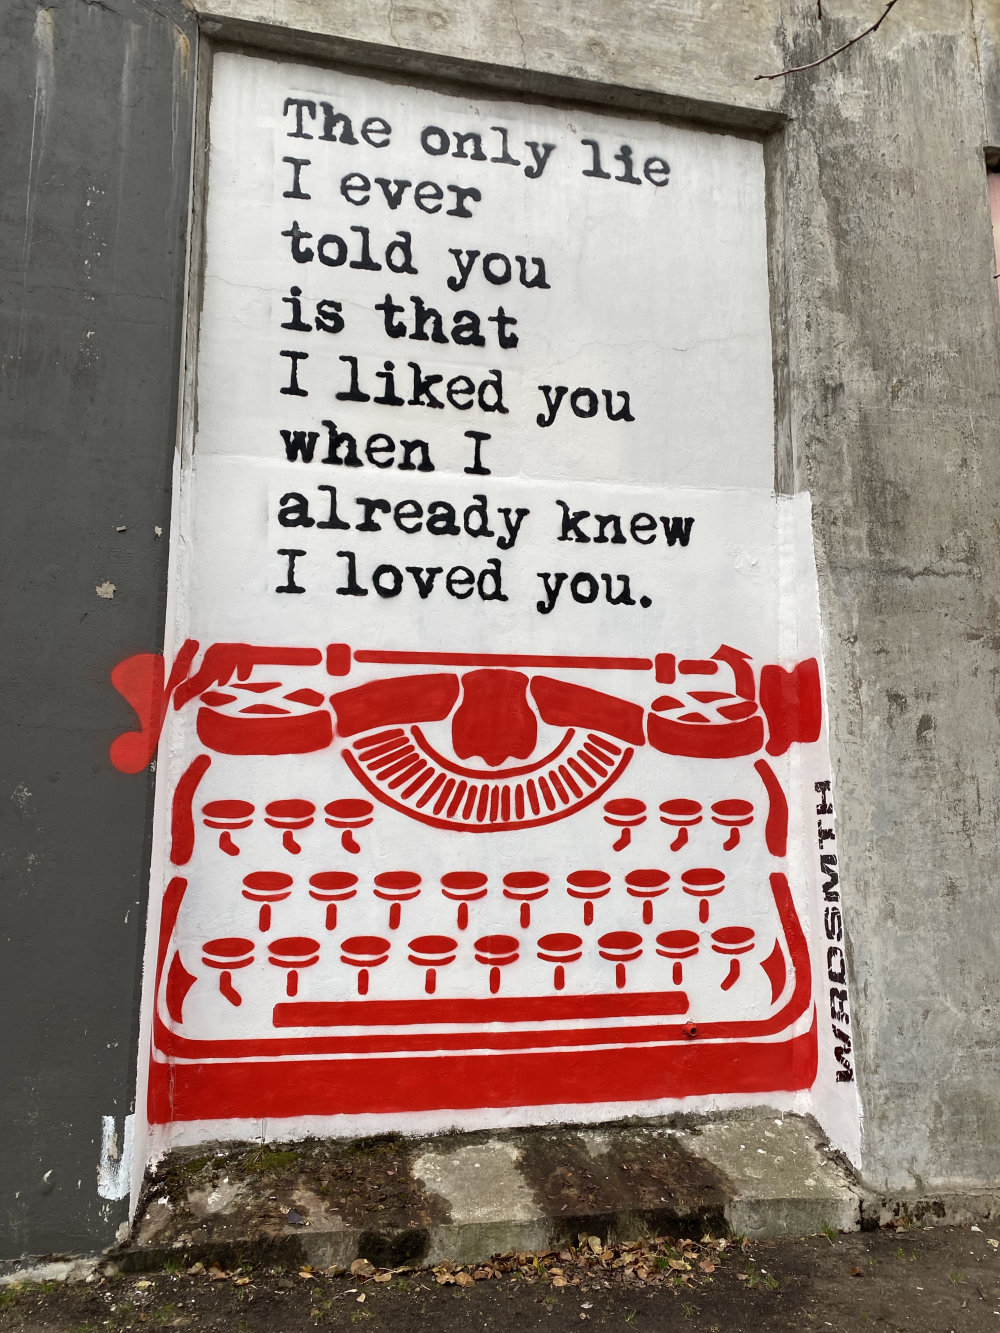 mural in Chicago by artist WRDSMTH.